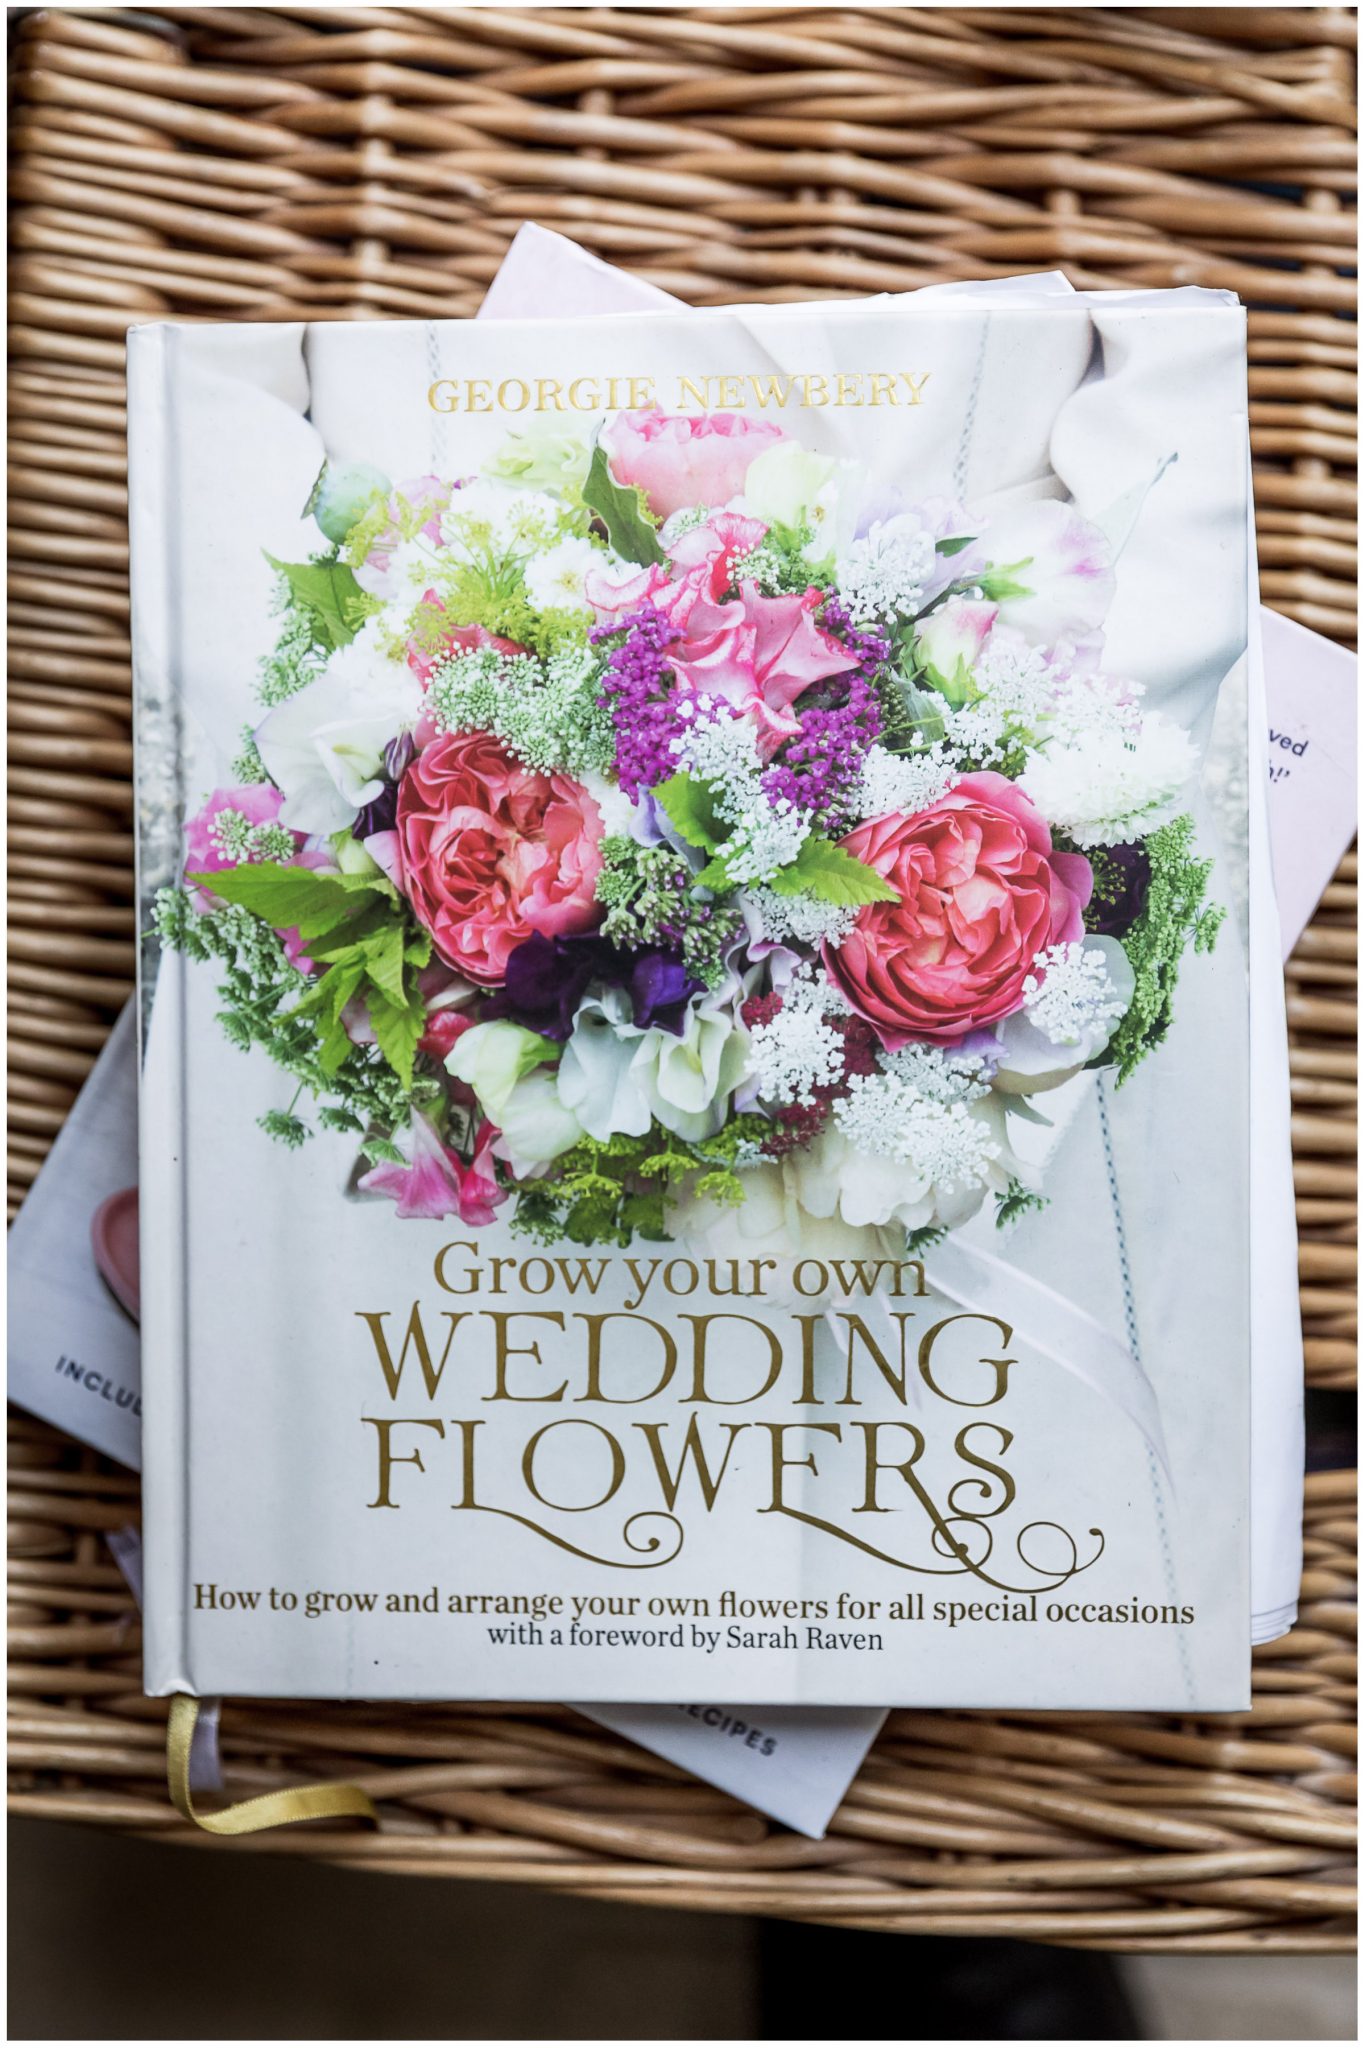 Grow your own wedding flowers